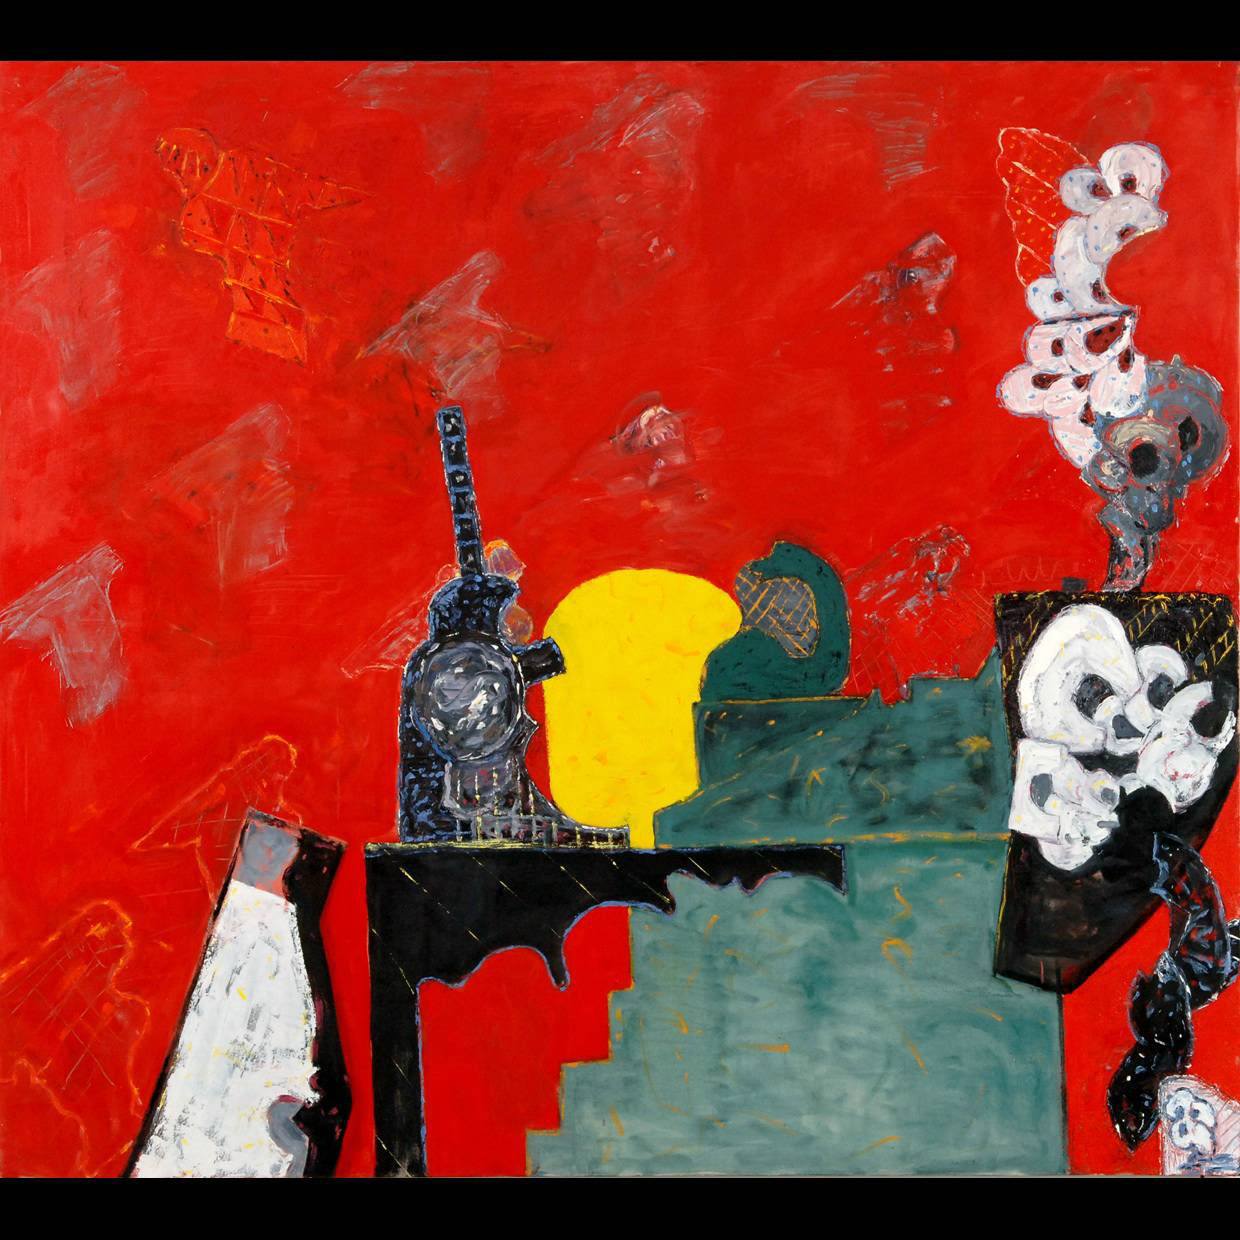 An abstract painting containing unrecognizable forms on a red background